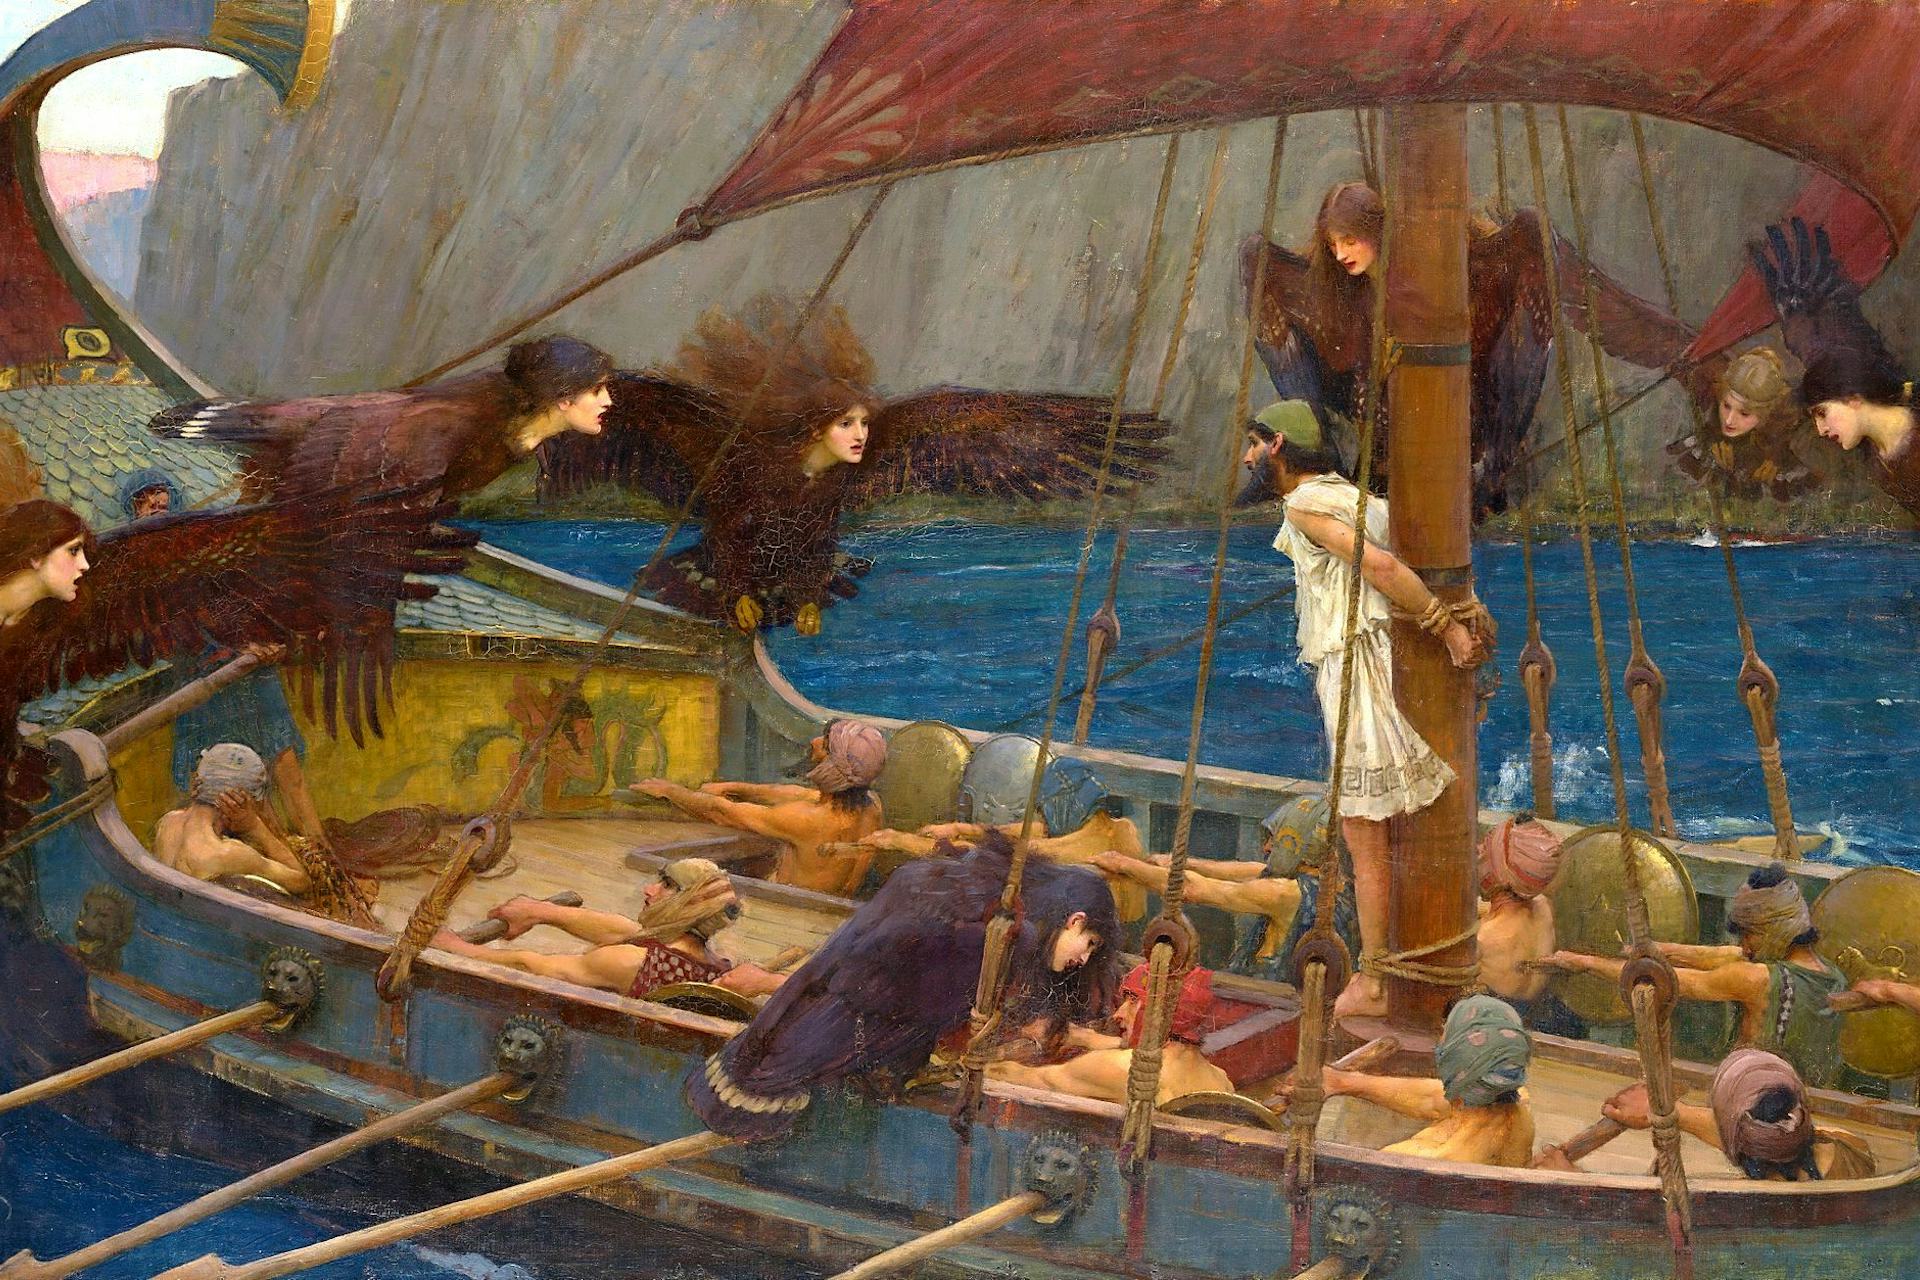 Ulysses and the Sirens by John William Waterhouse (1891)